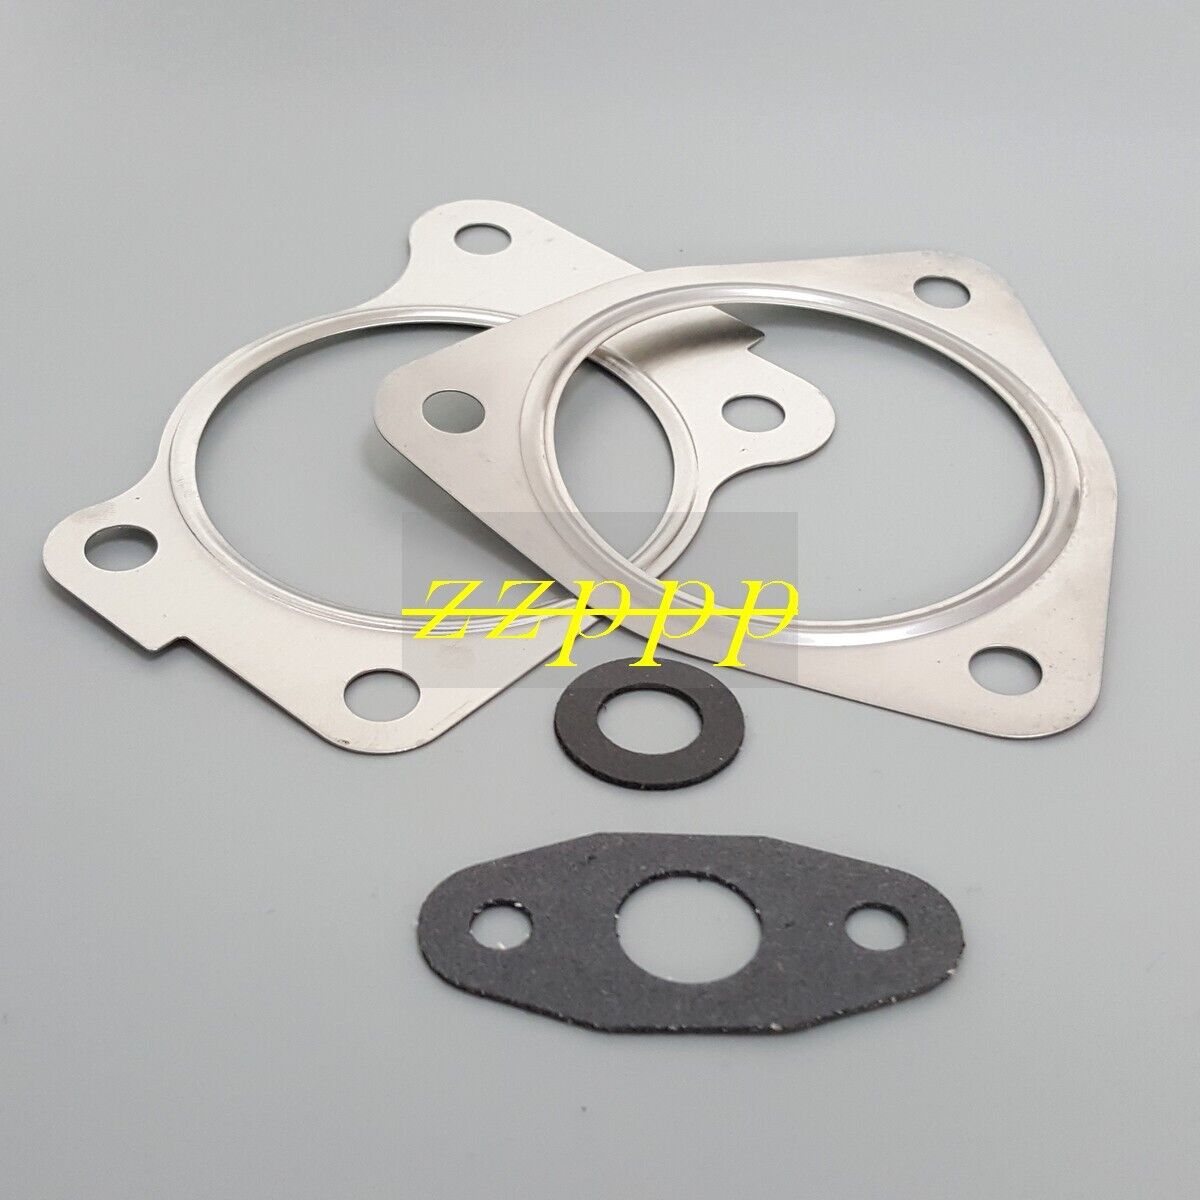 Exhaust Turbo gasket FOR MINI Cooper S Hatchback Convertible 1.6 JCW R50 R52 R53